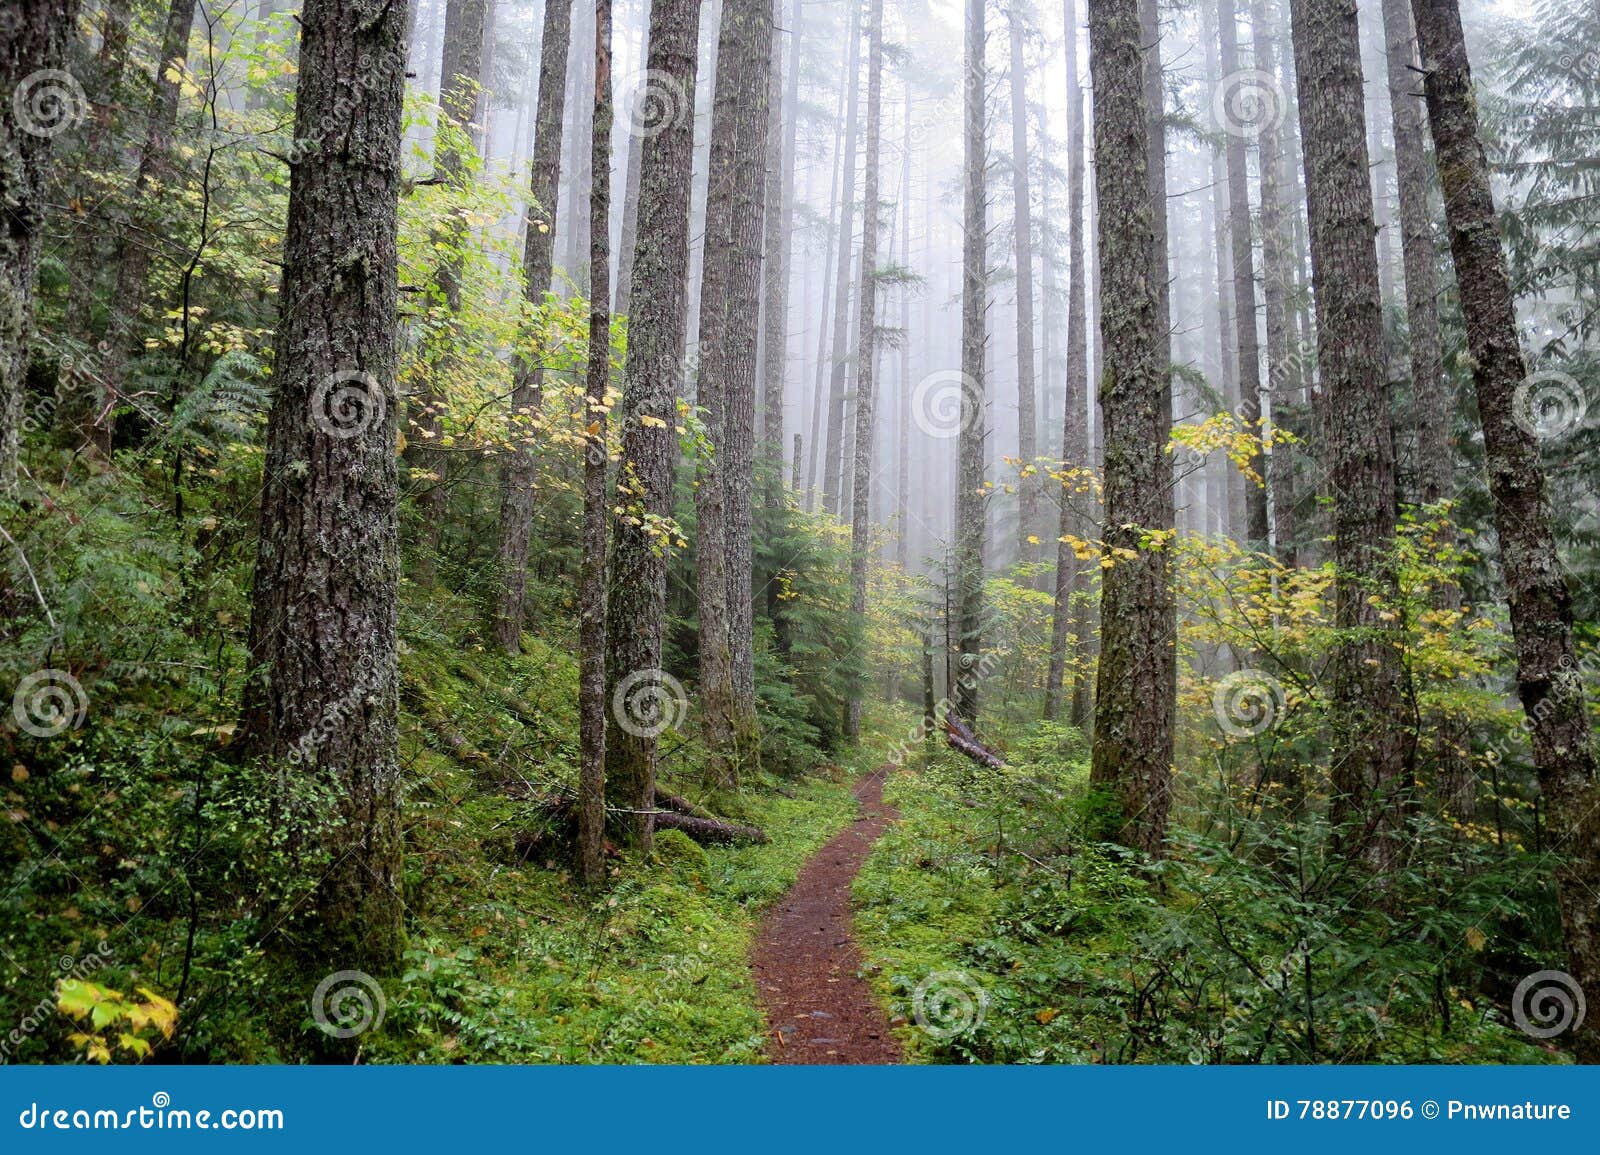 pacific northwest forest trail